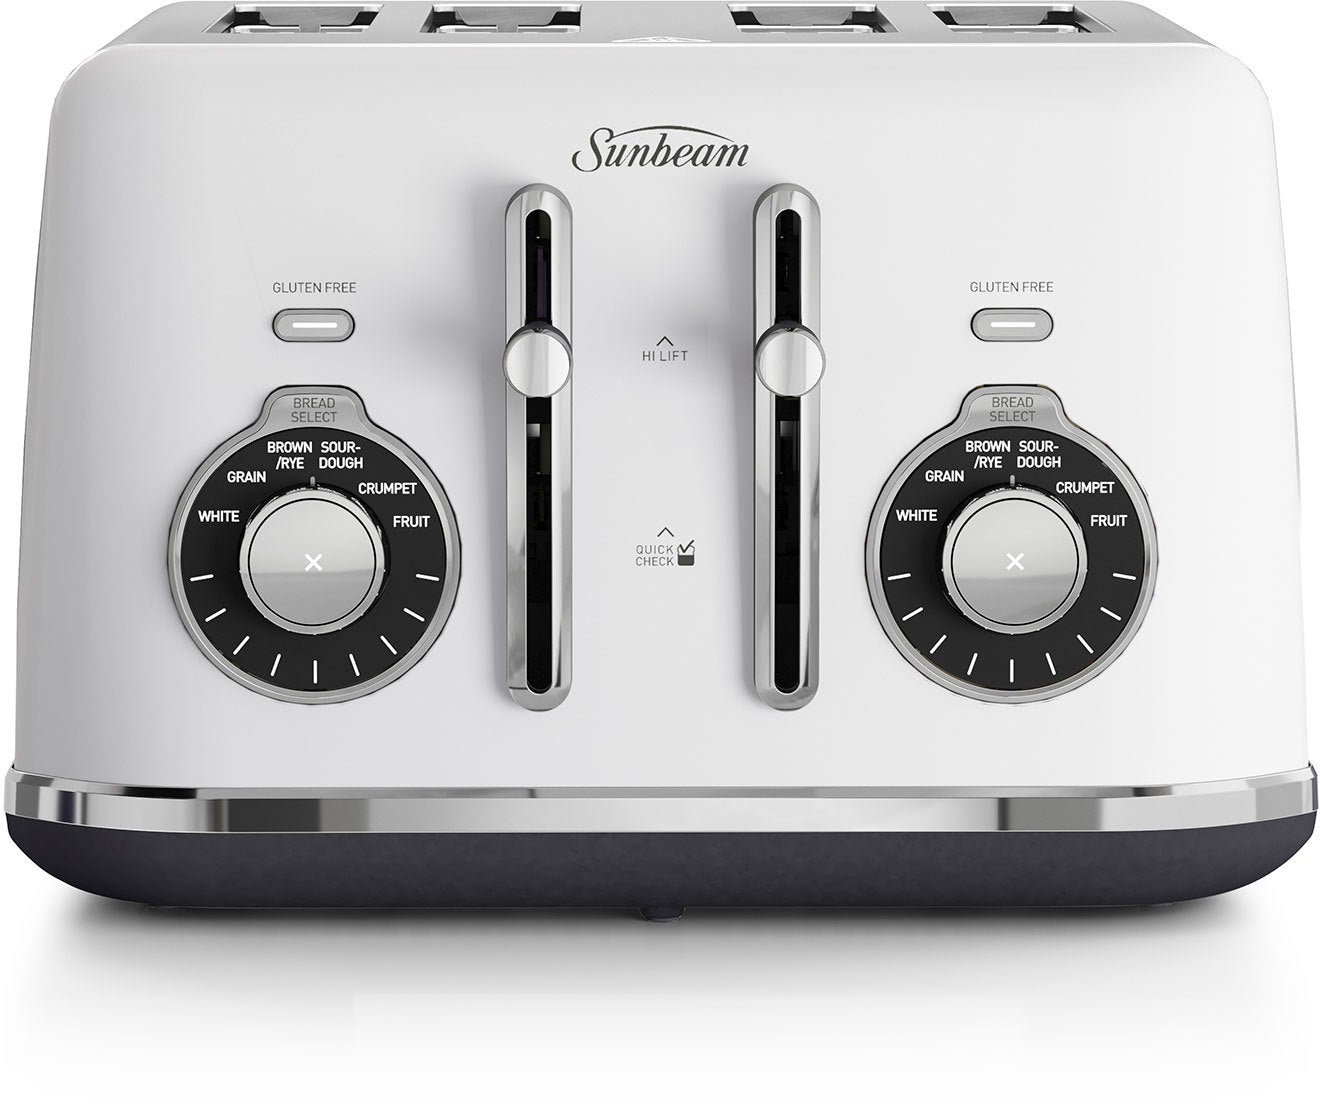 Sunbeam Alinea™ Collection Select 4 Slice Bread Select Toaster - White